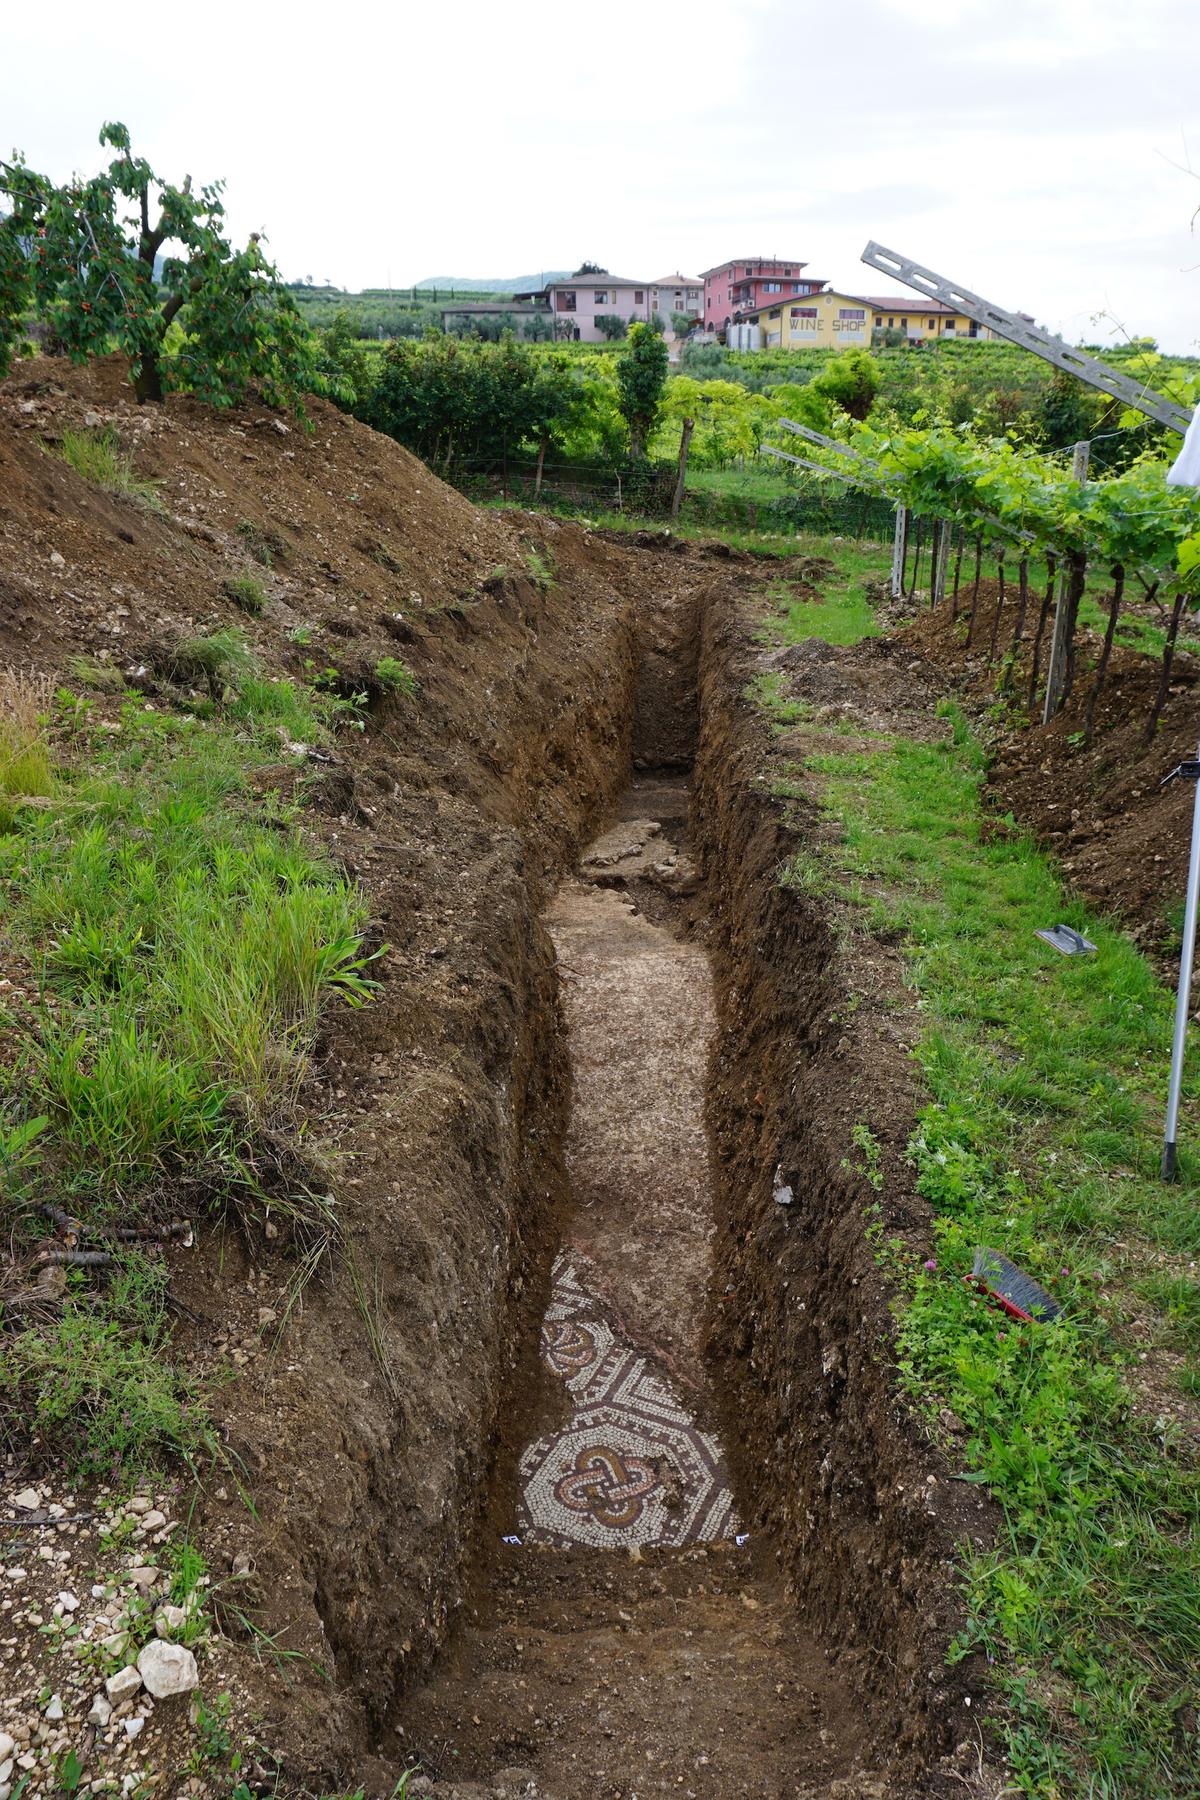 A trench exposes a Roman mosaic at an excavation site in Negrar di Valpolicella. (Courtesy of <a href="http://www.comunenegrar.it">SABAP-VR</a>)